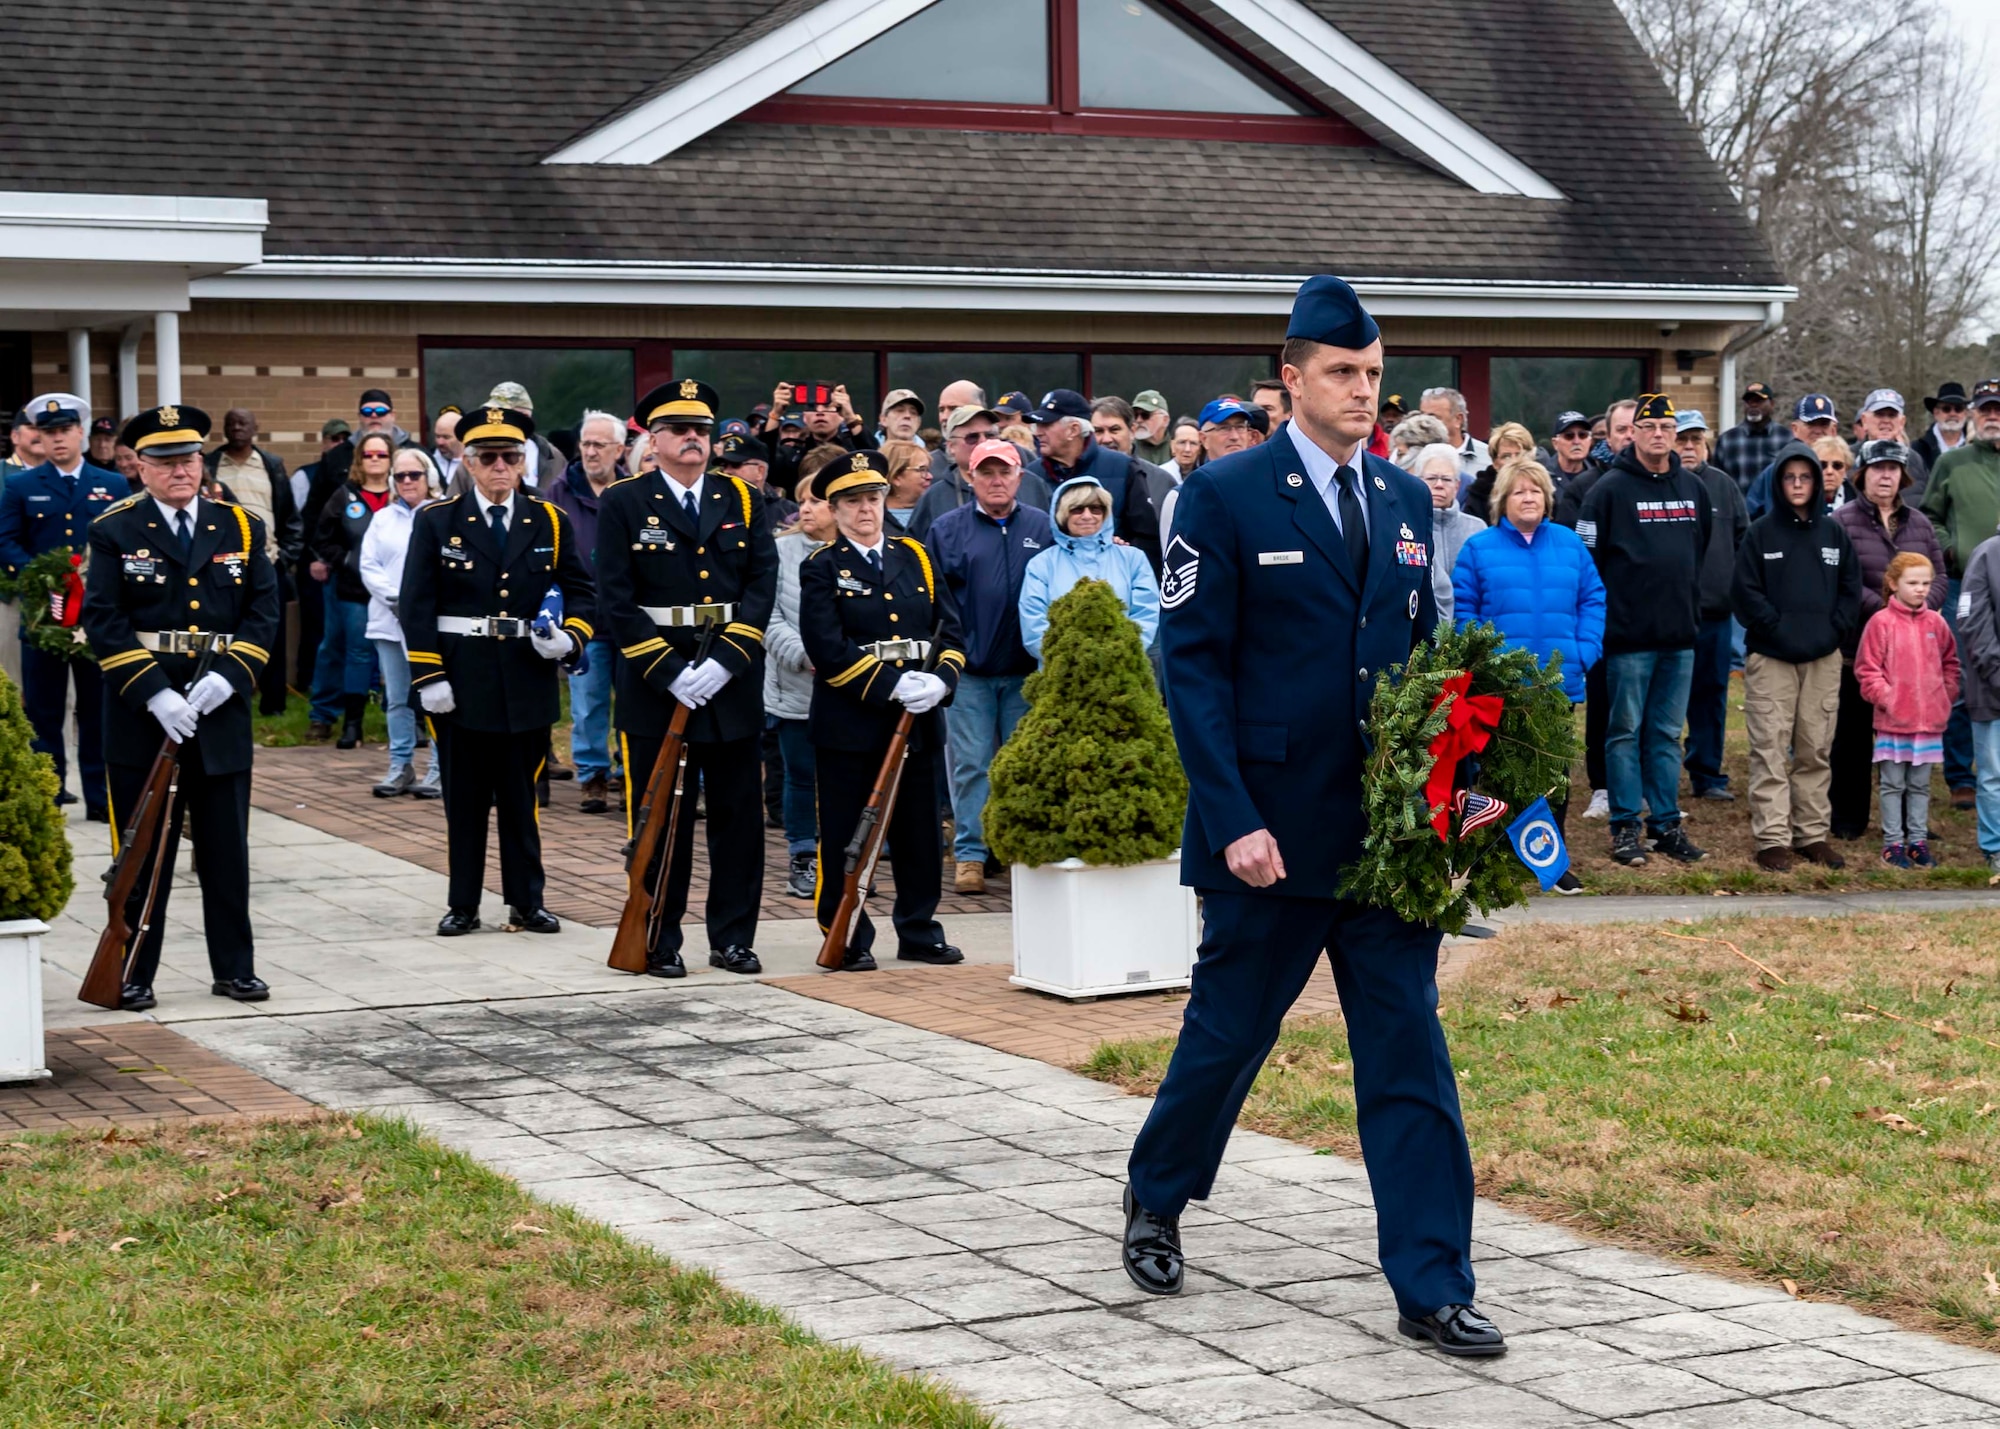 Master Sgt. Jason Brede, 436th Airlift Wing Staff Agency first sergeant, carries a wreath during a wreath laying ceremony at the Delaware Veterans Memorial Cemetery in Millsboro, Delaware, Dec. 18, 2021. Each December, on National Wreaths Across America Day, wreath laying ceremonies are held across the country at more than 2,100 cemeteries, honoring veterans and those who have fallen. (U.S. Air Force photo by Senior Airman Stephani Barge)